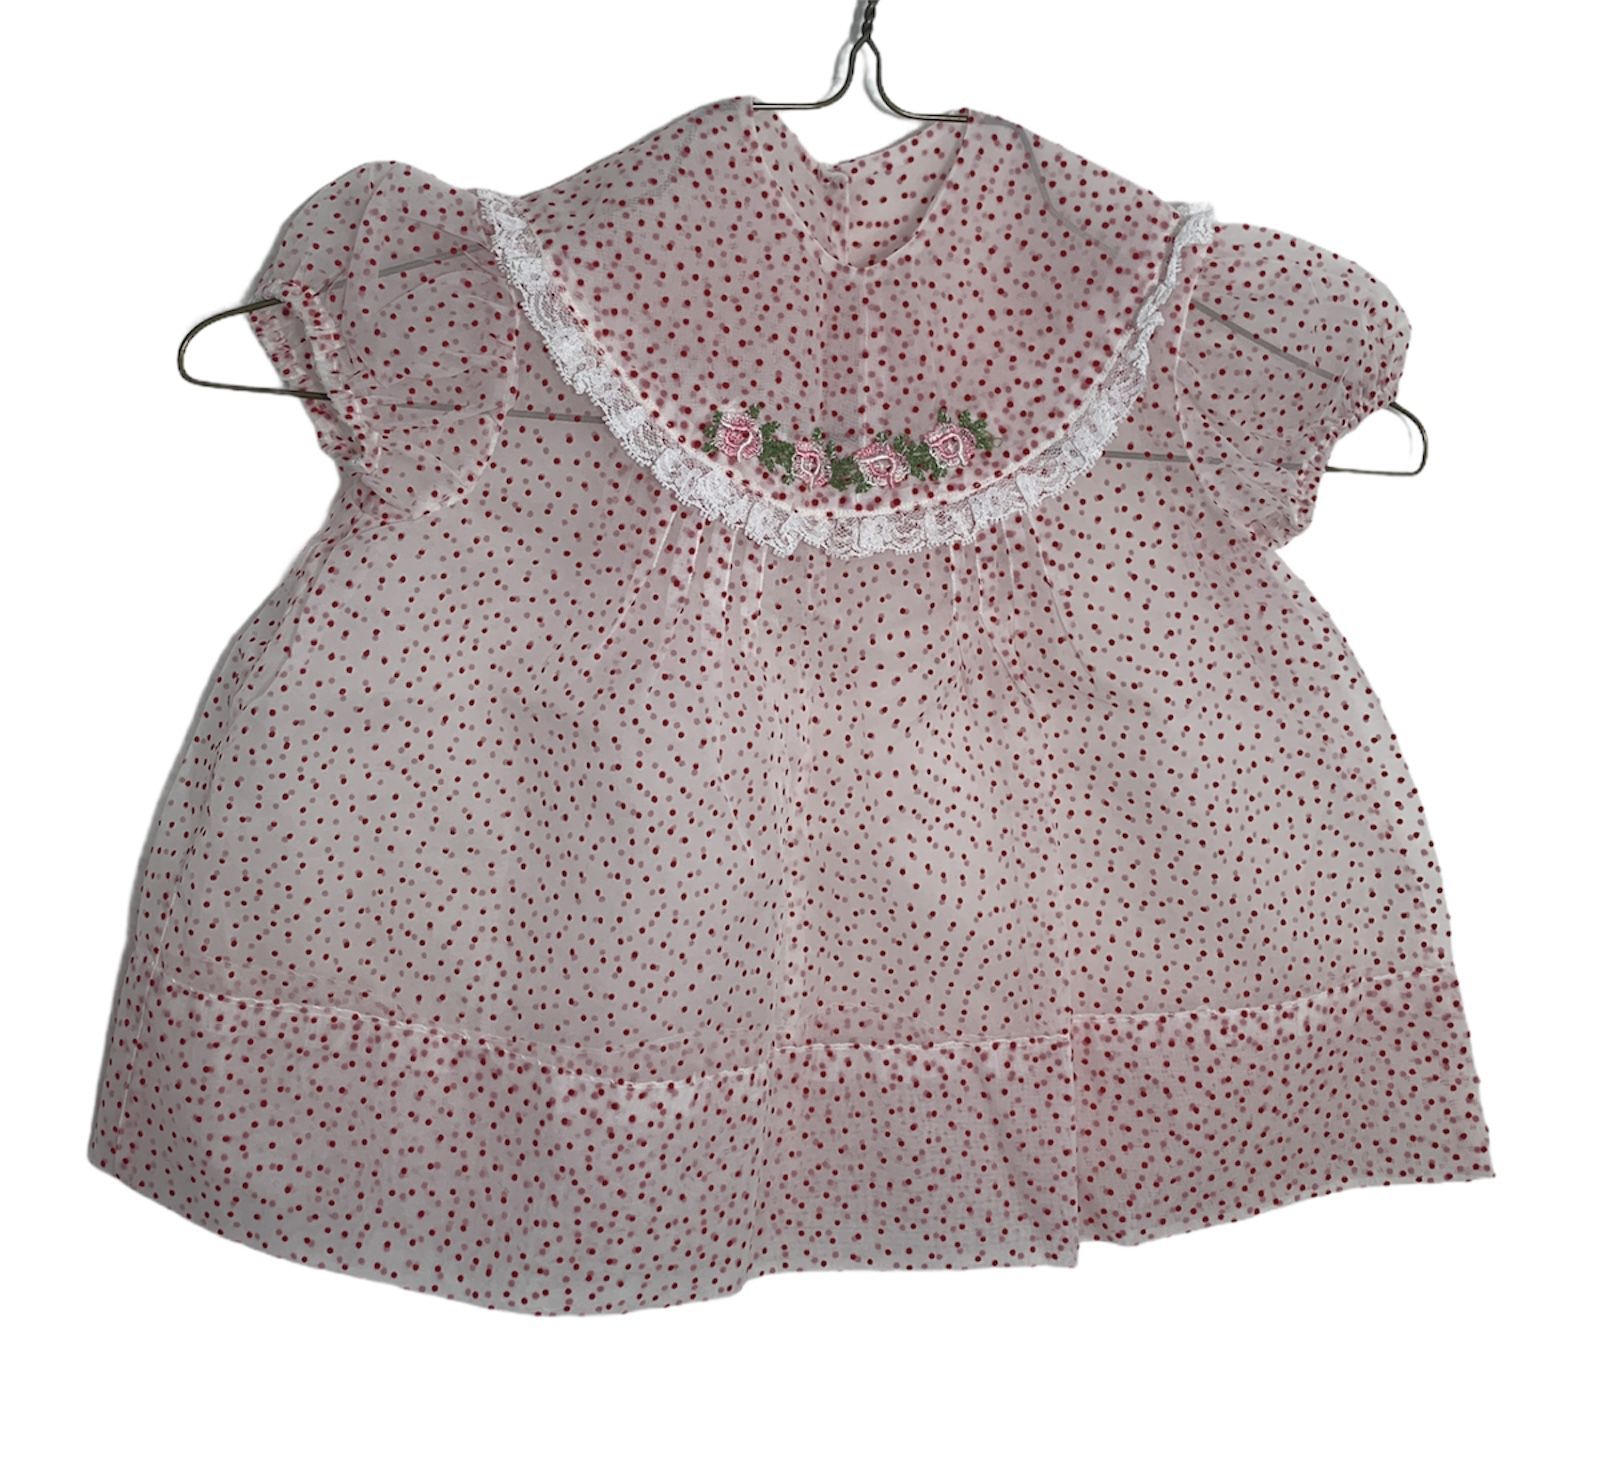 VTG Baby Girl Party Dress White Sheer Red Polka Dots Sheer Lace Floral Applique